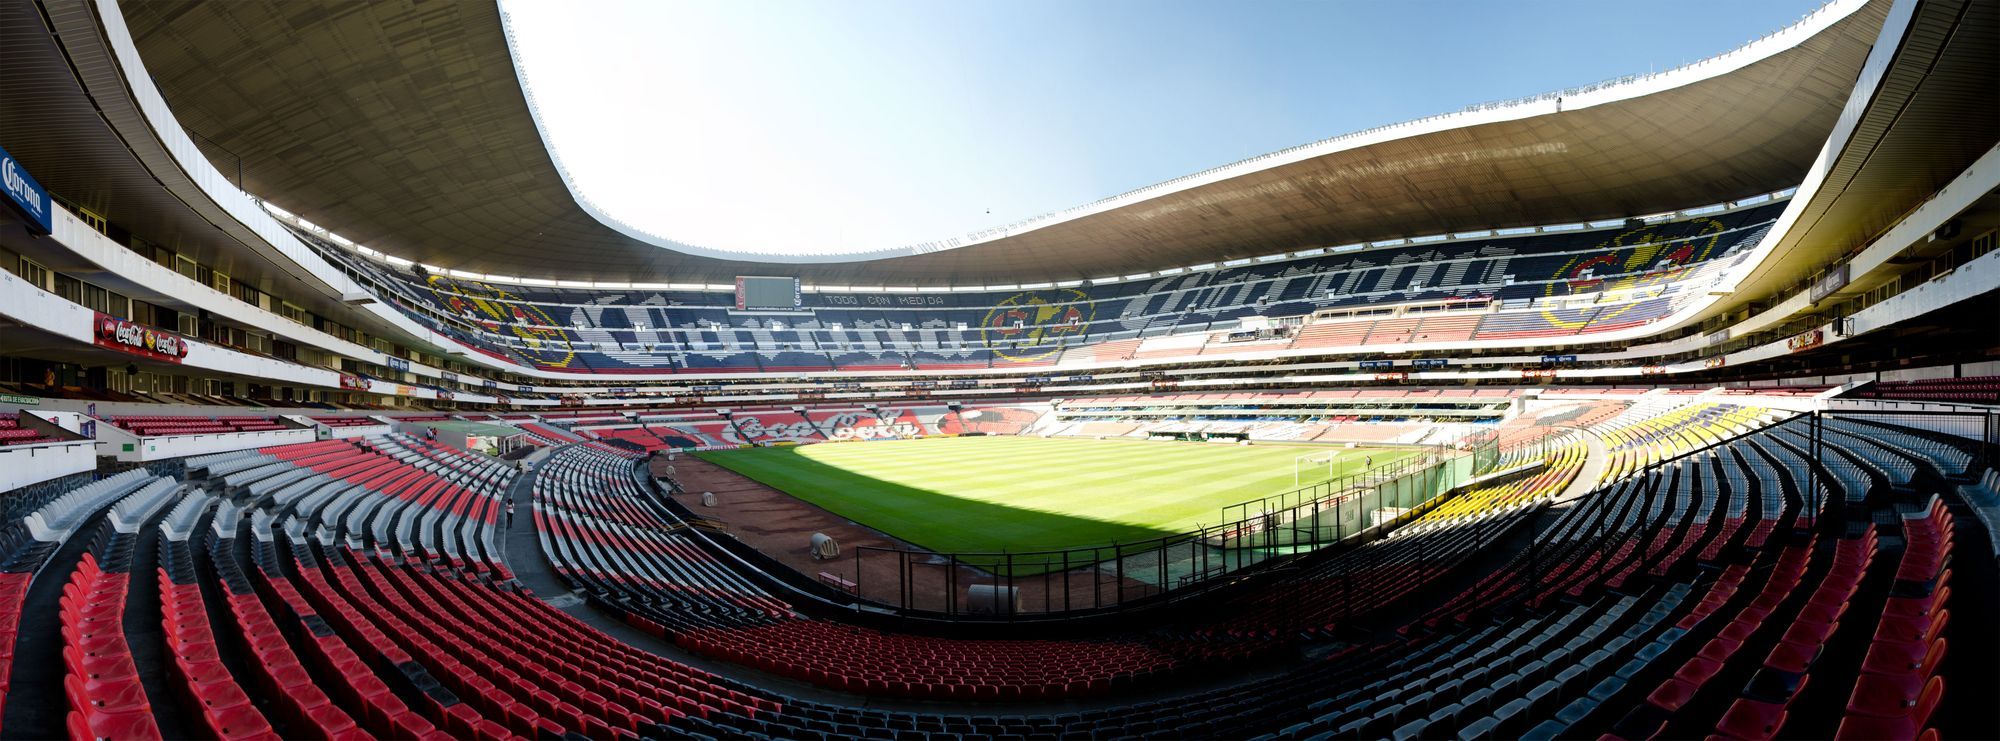 Estadio Azteca known affectionately as El Monumental Mexicano de Futbol  has become one of the iconic homes for Mexican football